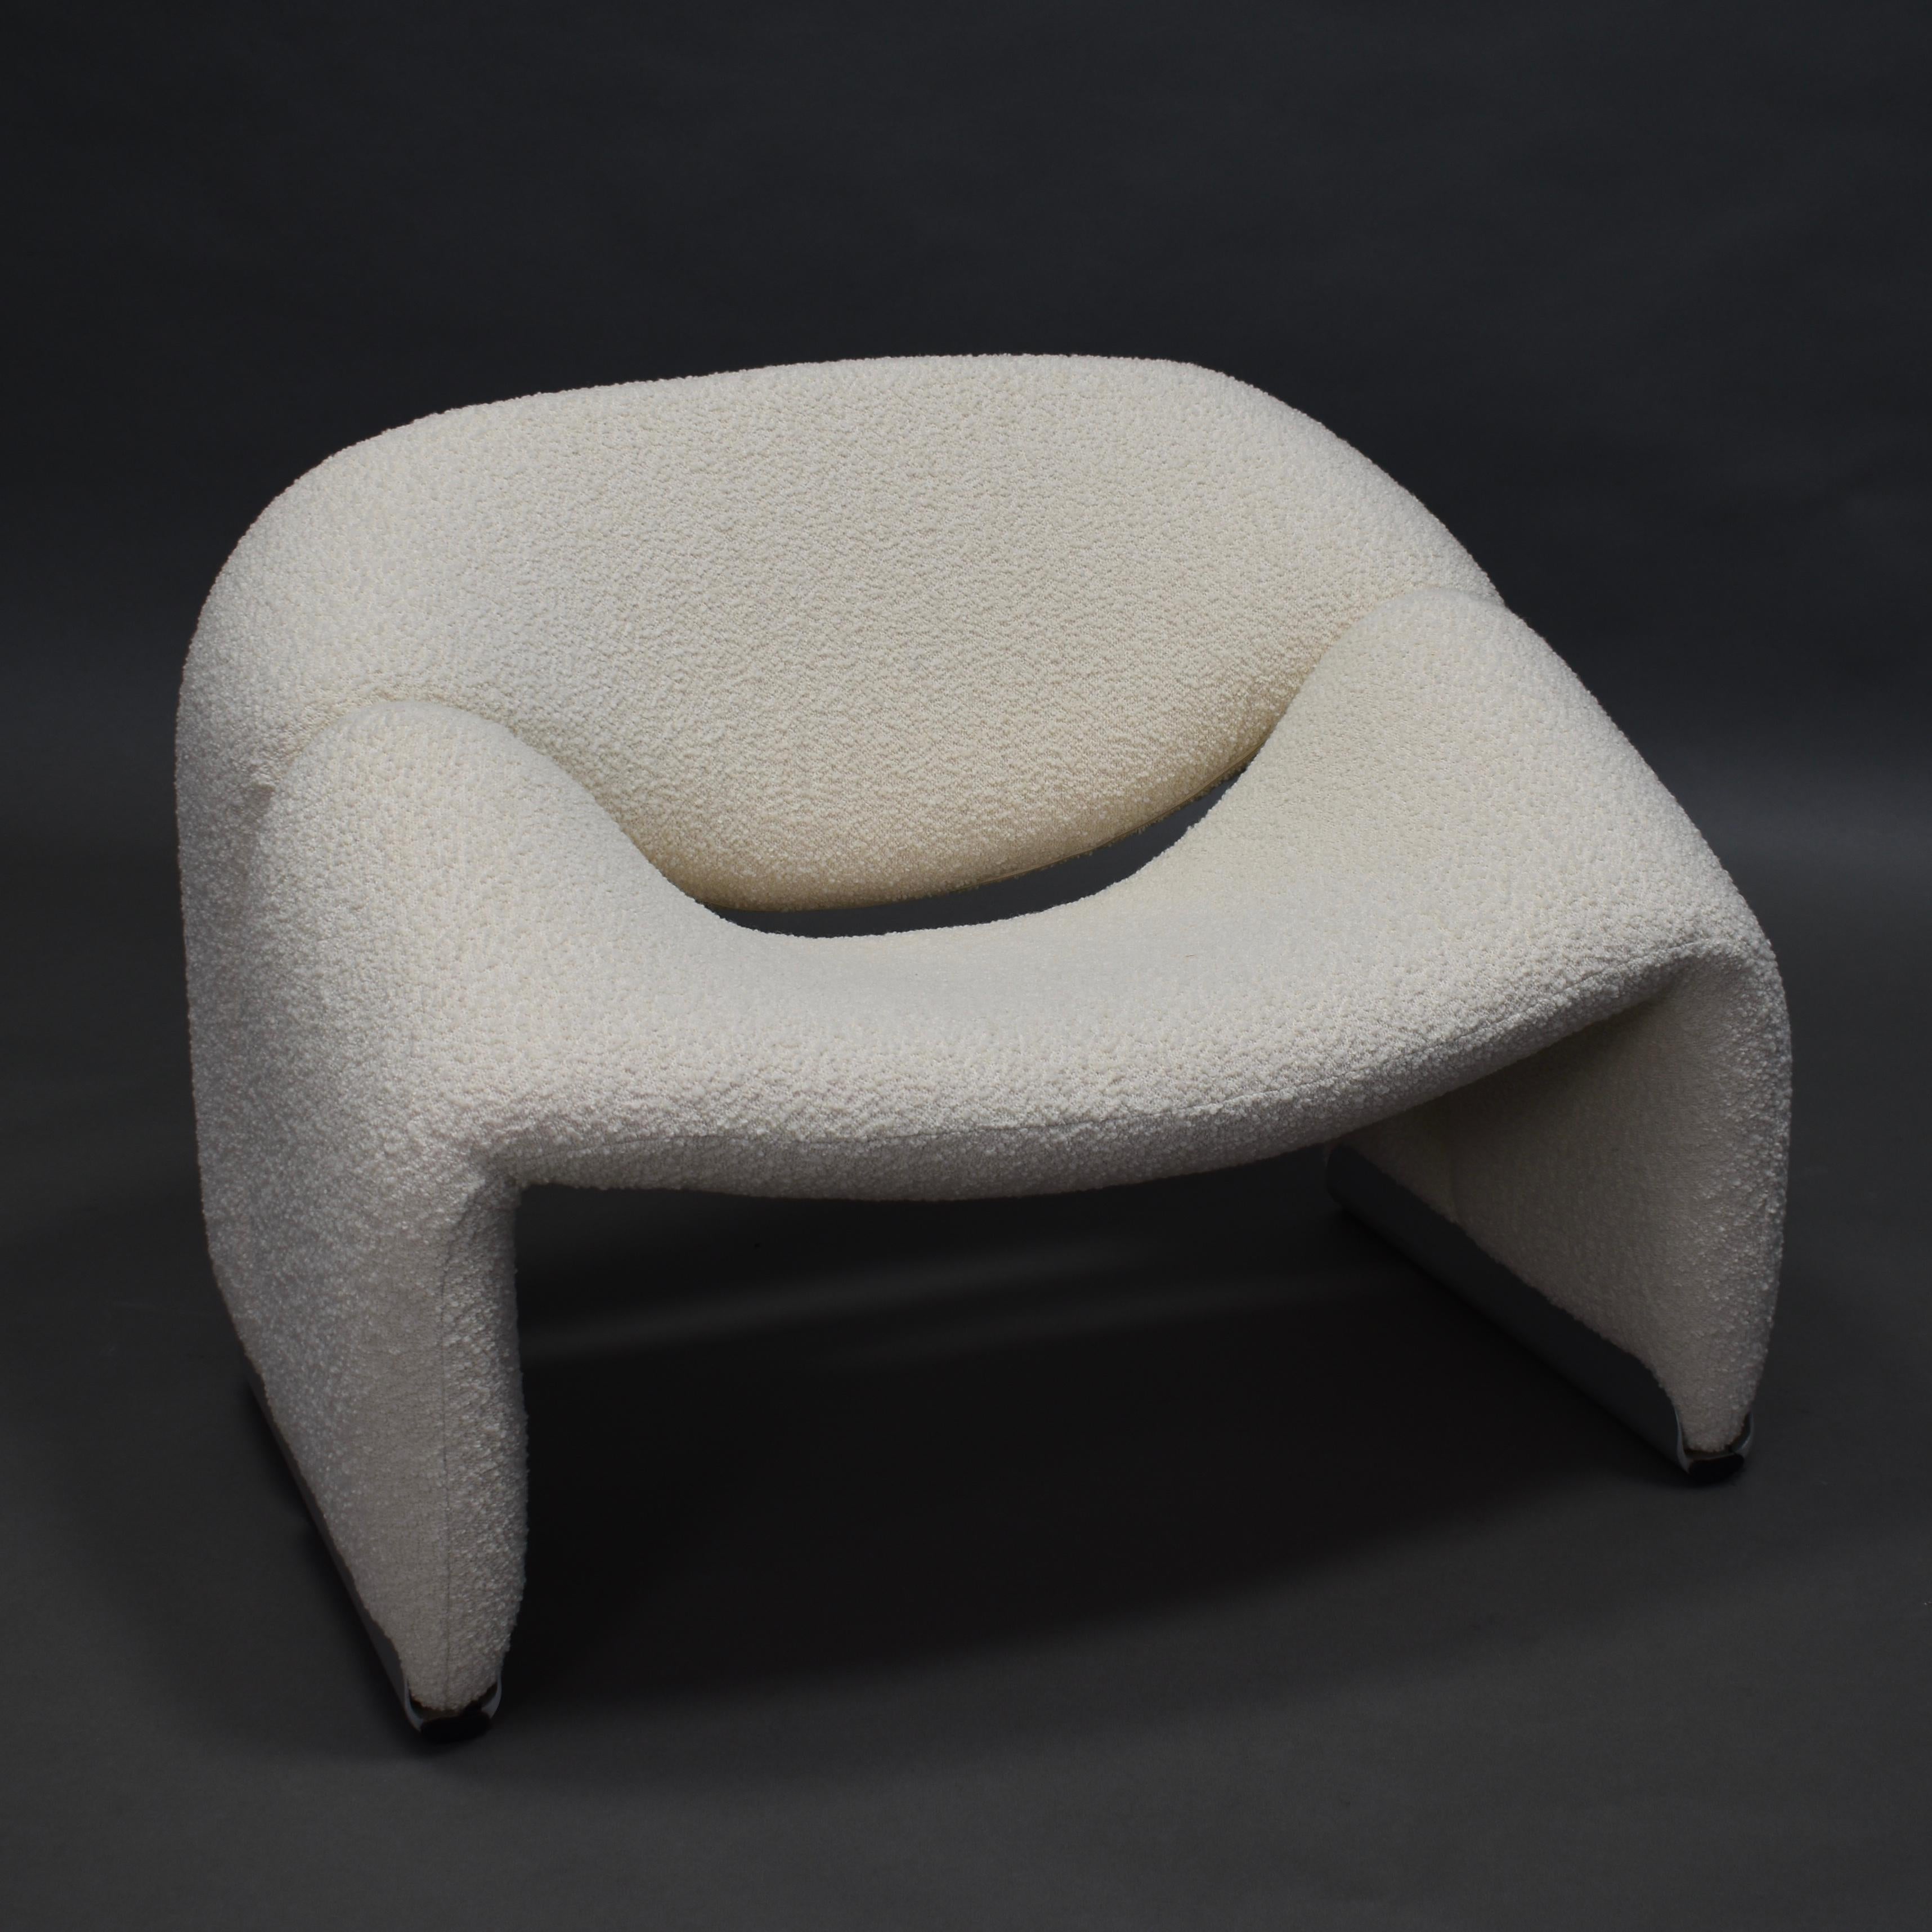 Late 20th Century Pierre Paulin F598 Groovy Lounge Chair for Artifort, Netherlands, 1972